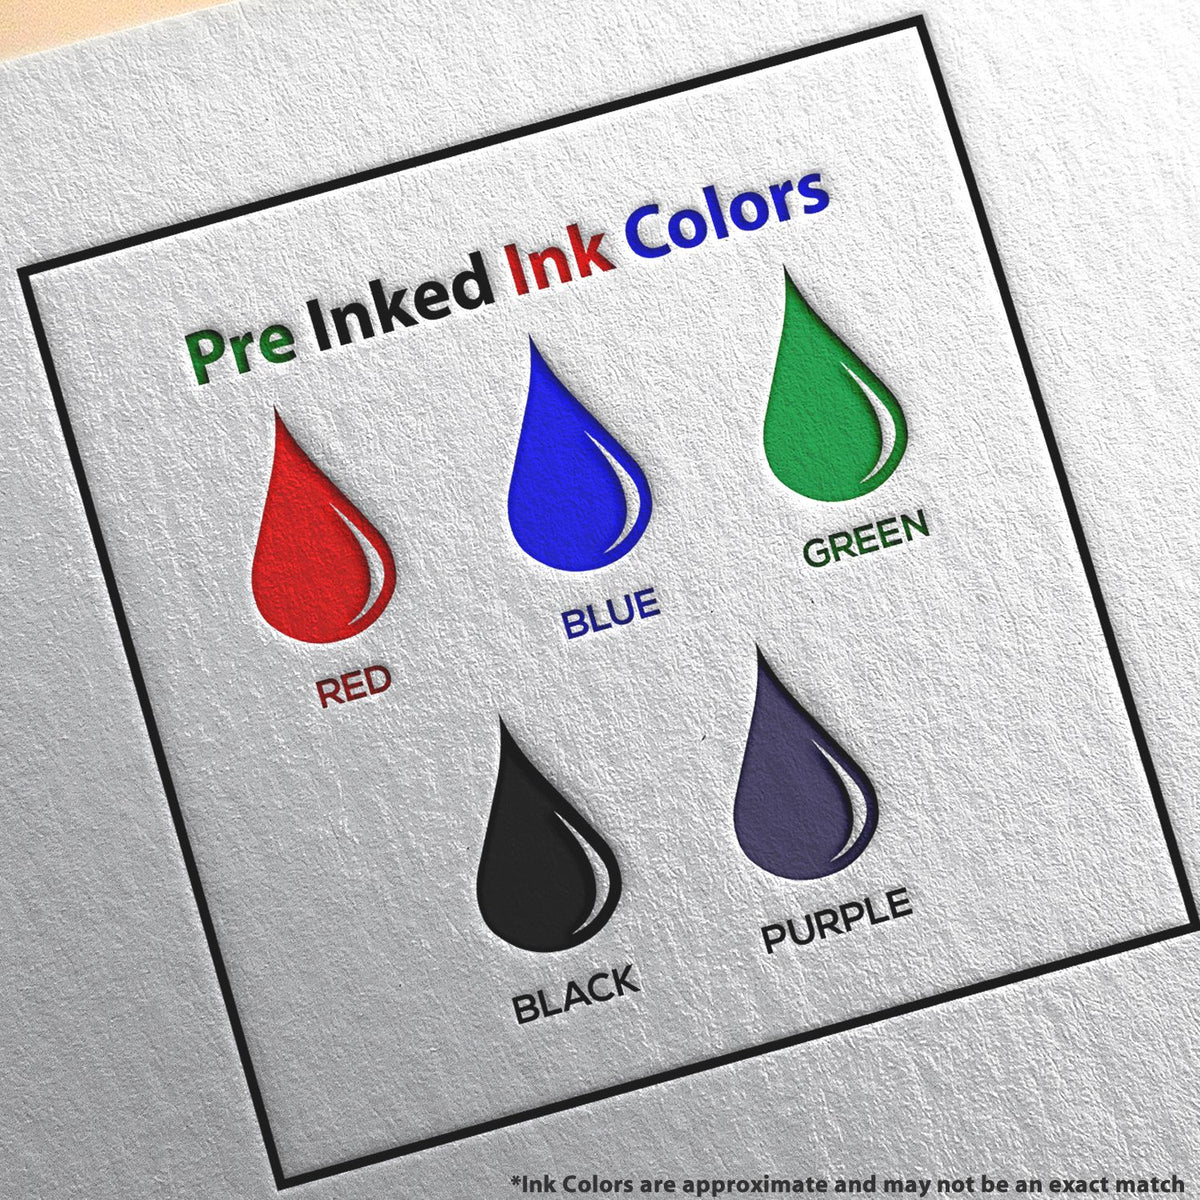 A picture showing the different ink colors or hues available for the Slim Pre-Inked Michigan Land Surveyor Seal Stamp product.